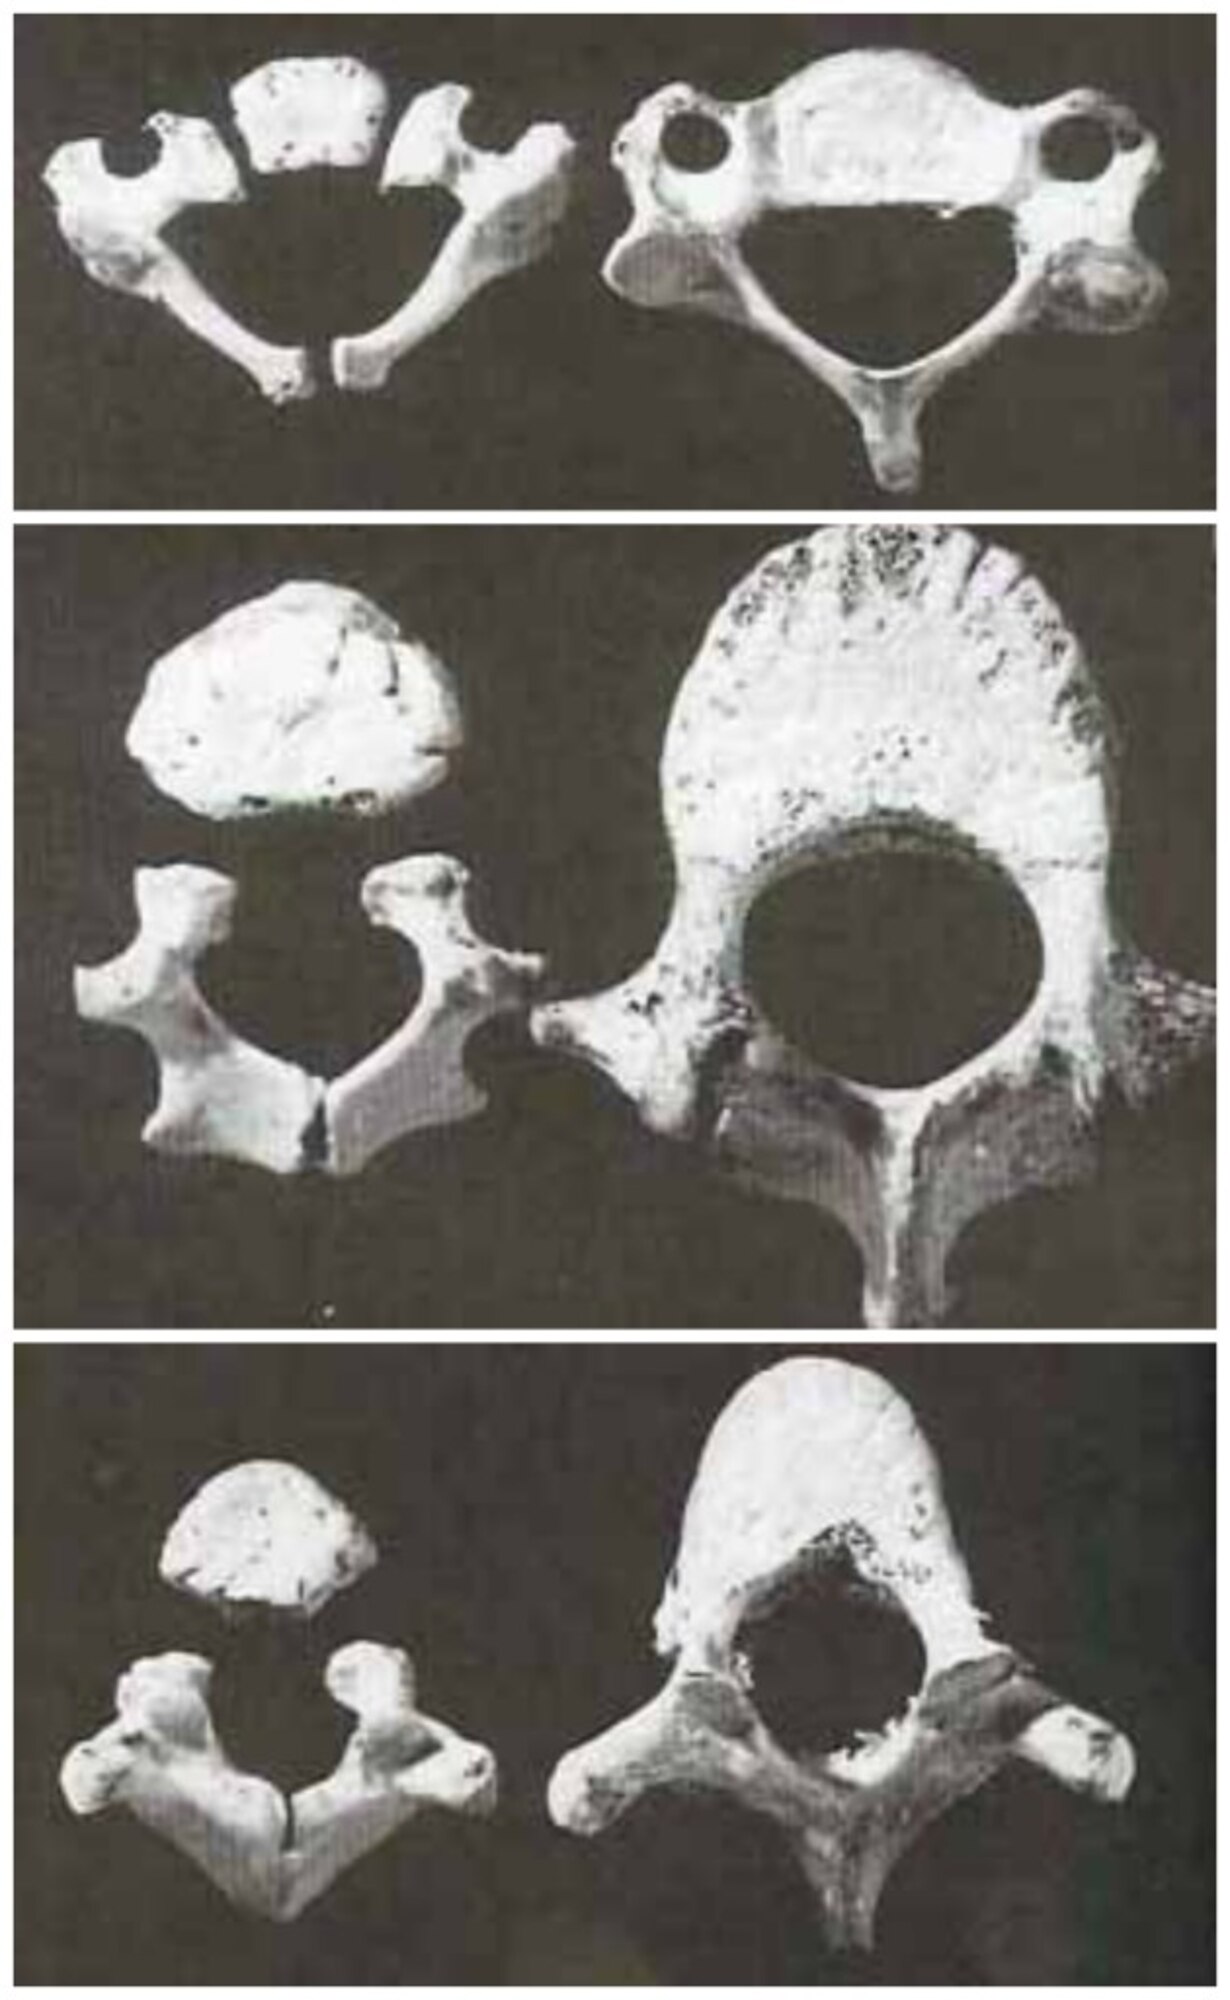 Image shows non-fused areas of the bone in the tailbone and pelvic areas in children. (courtesy photo/ carseatsforthelittles.org)